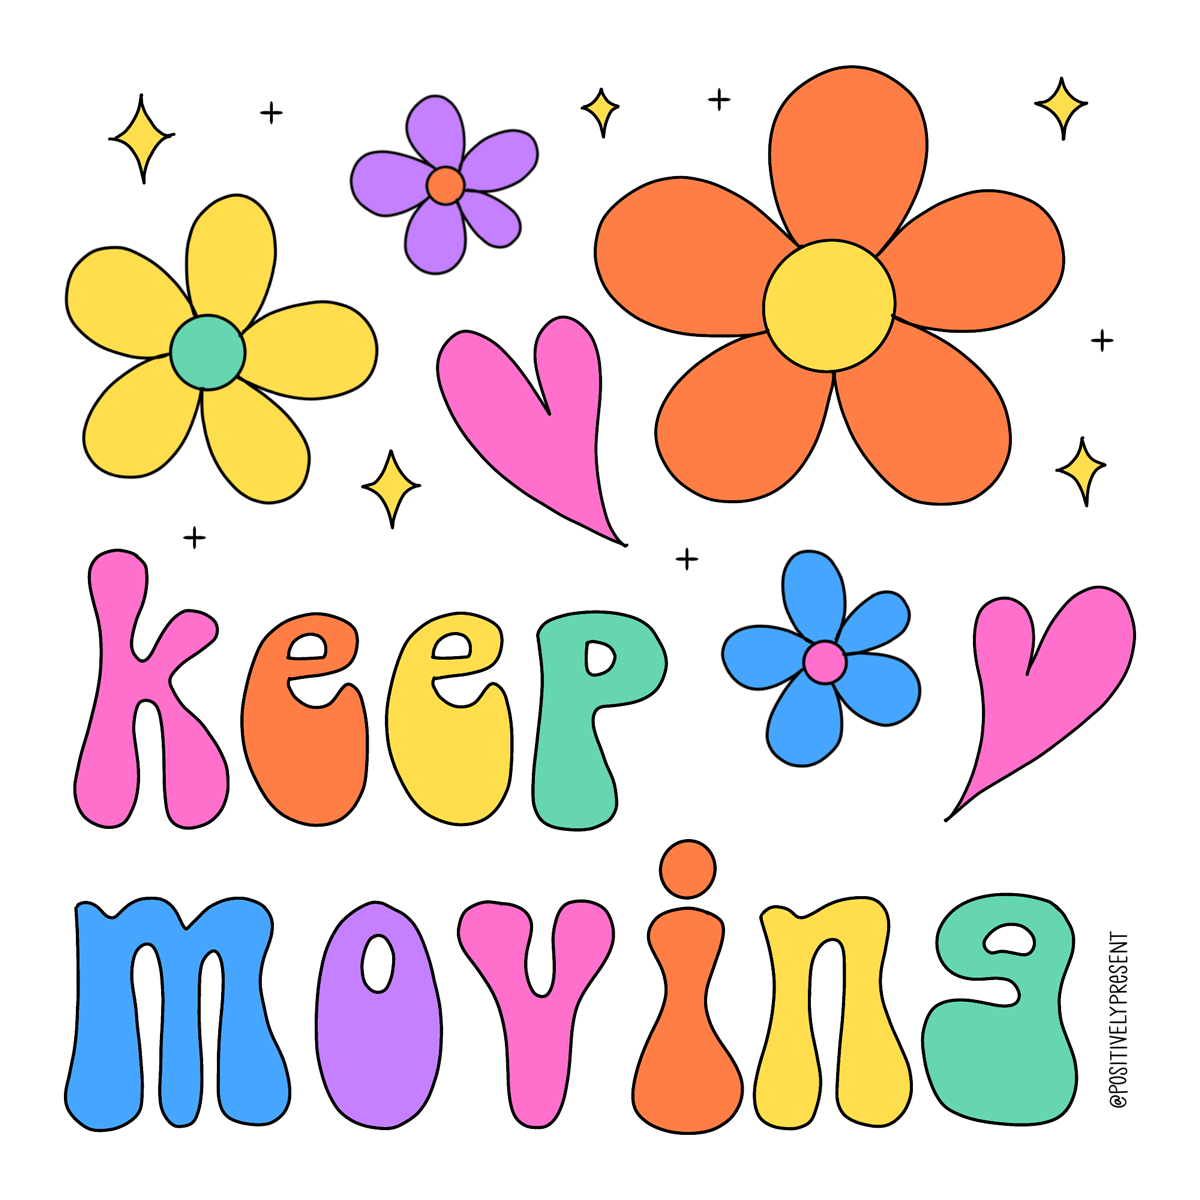 bright colored 60s looking daisies withh thext keep moving in groovy font.